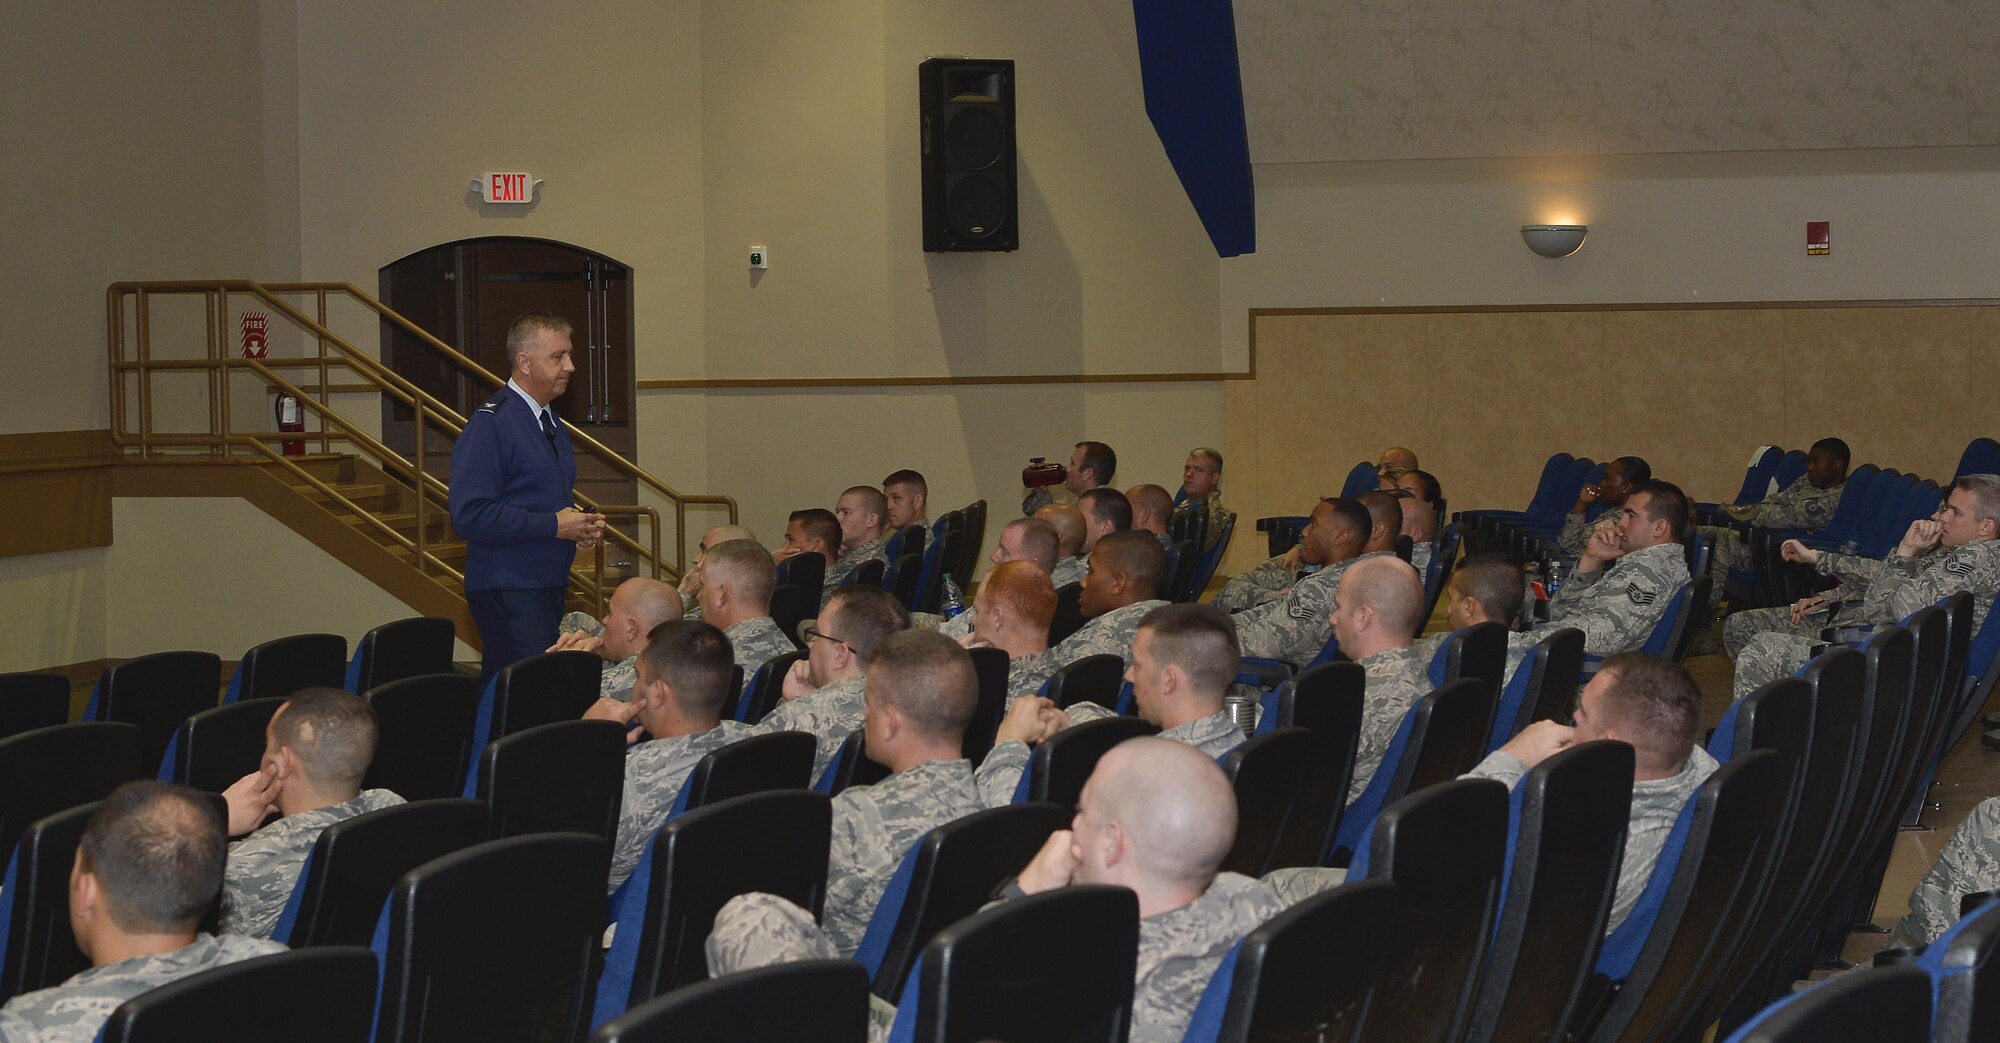 Col. Richard Tatem, individual mobility augmentee to the director of Profession of Arms Center of Excellence (PACE), speaks to military members during the PACE course at MacDill Air Force Base, Fla., Aug. 8, 2016. The five-hour course focused on self-improvement, self-reflection and improving communication skills. (U.S. Air Force photo by Airman 1st Class Mariette Adams)